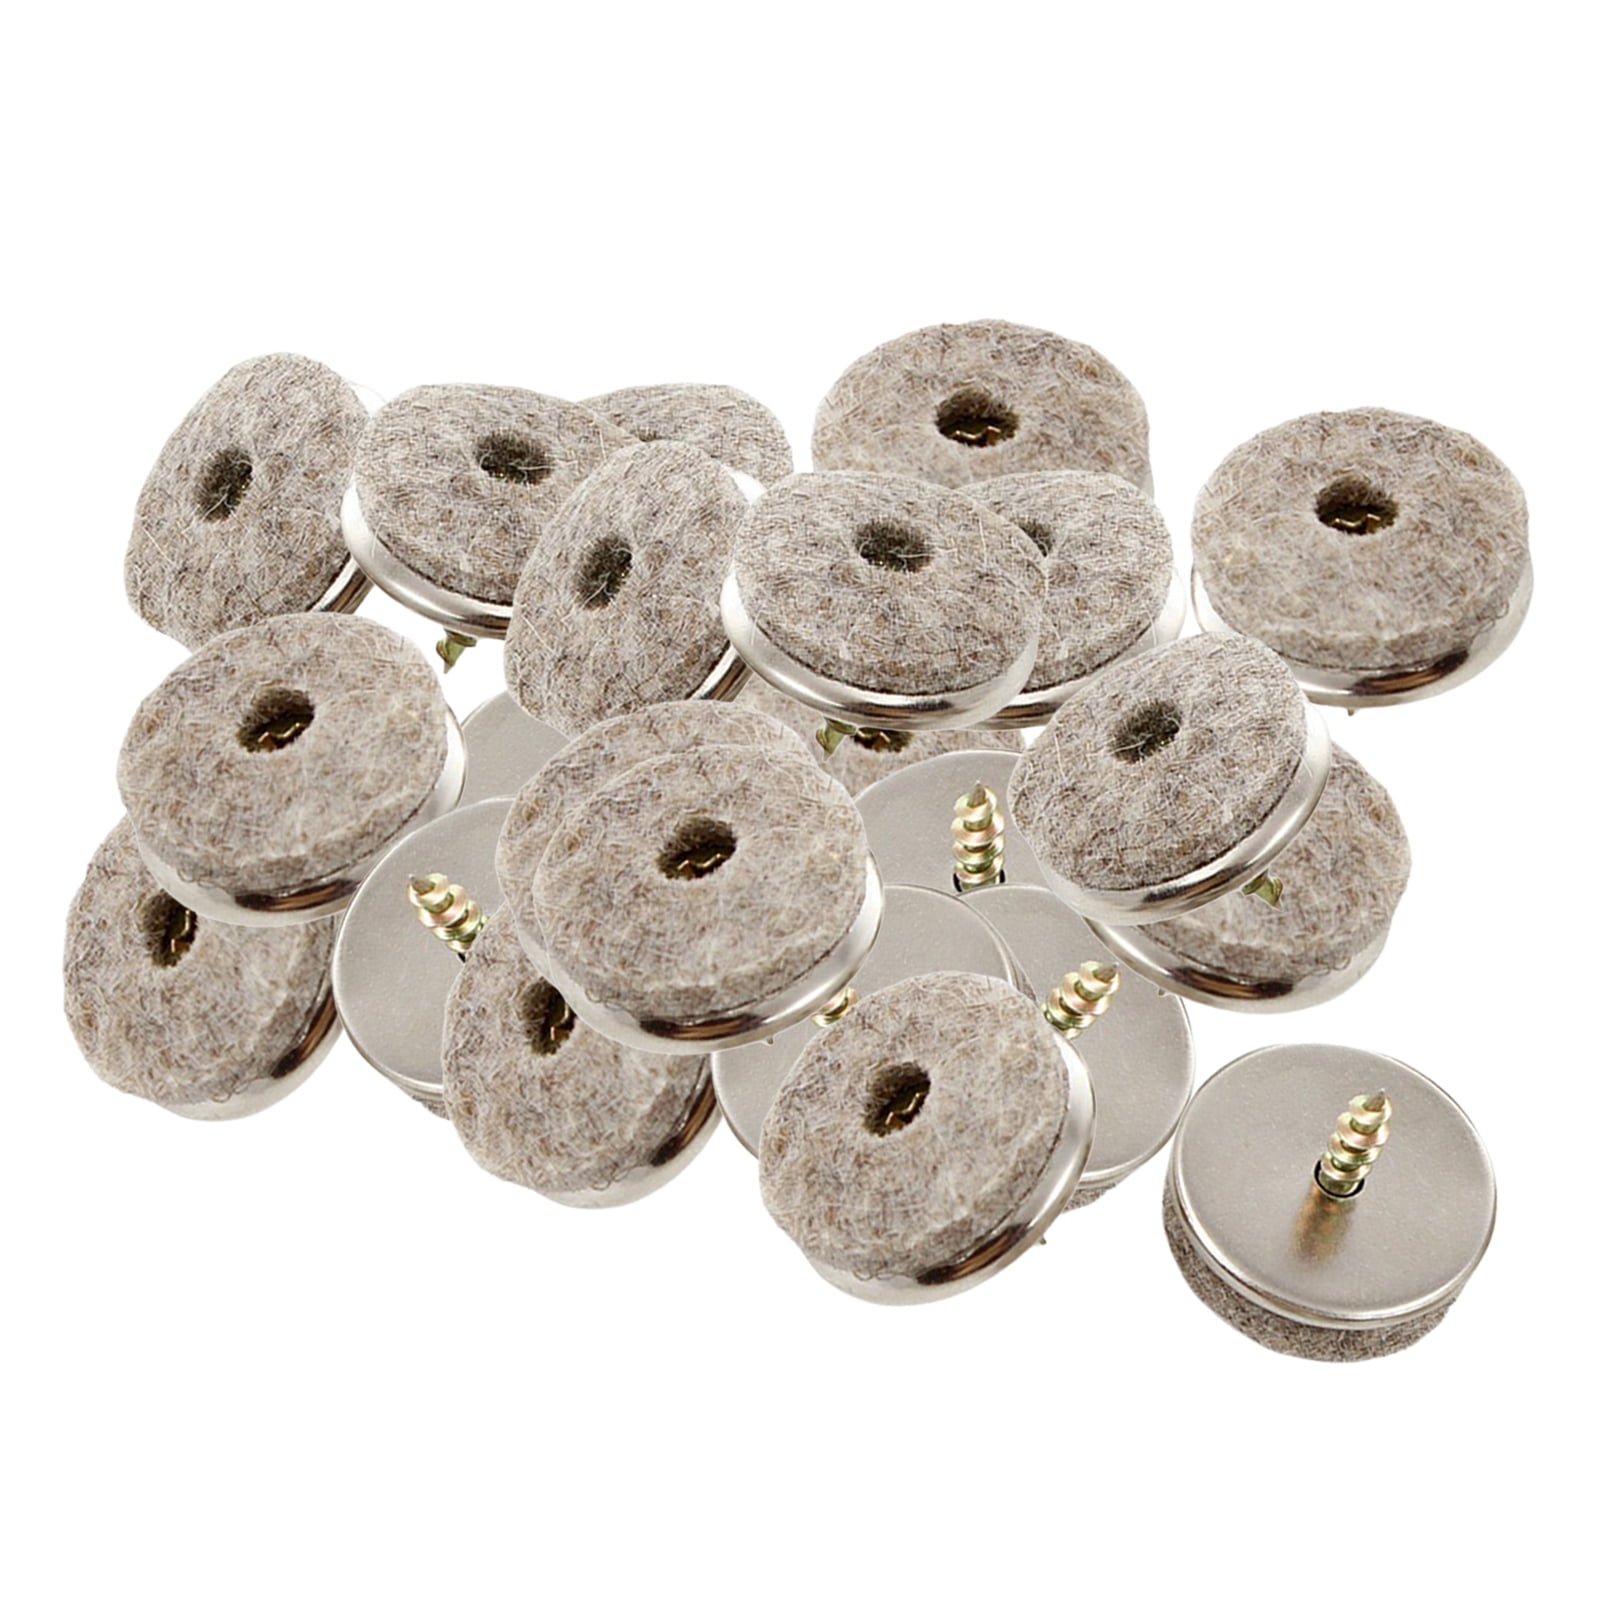 Felt Surface Protector Pads 6 x 38mm Round Pads 